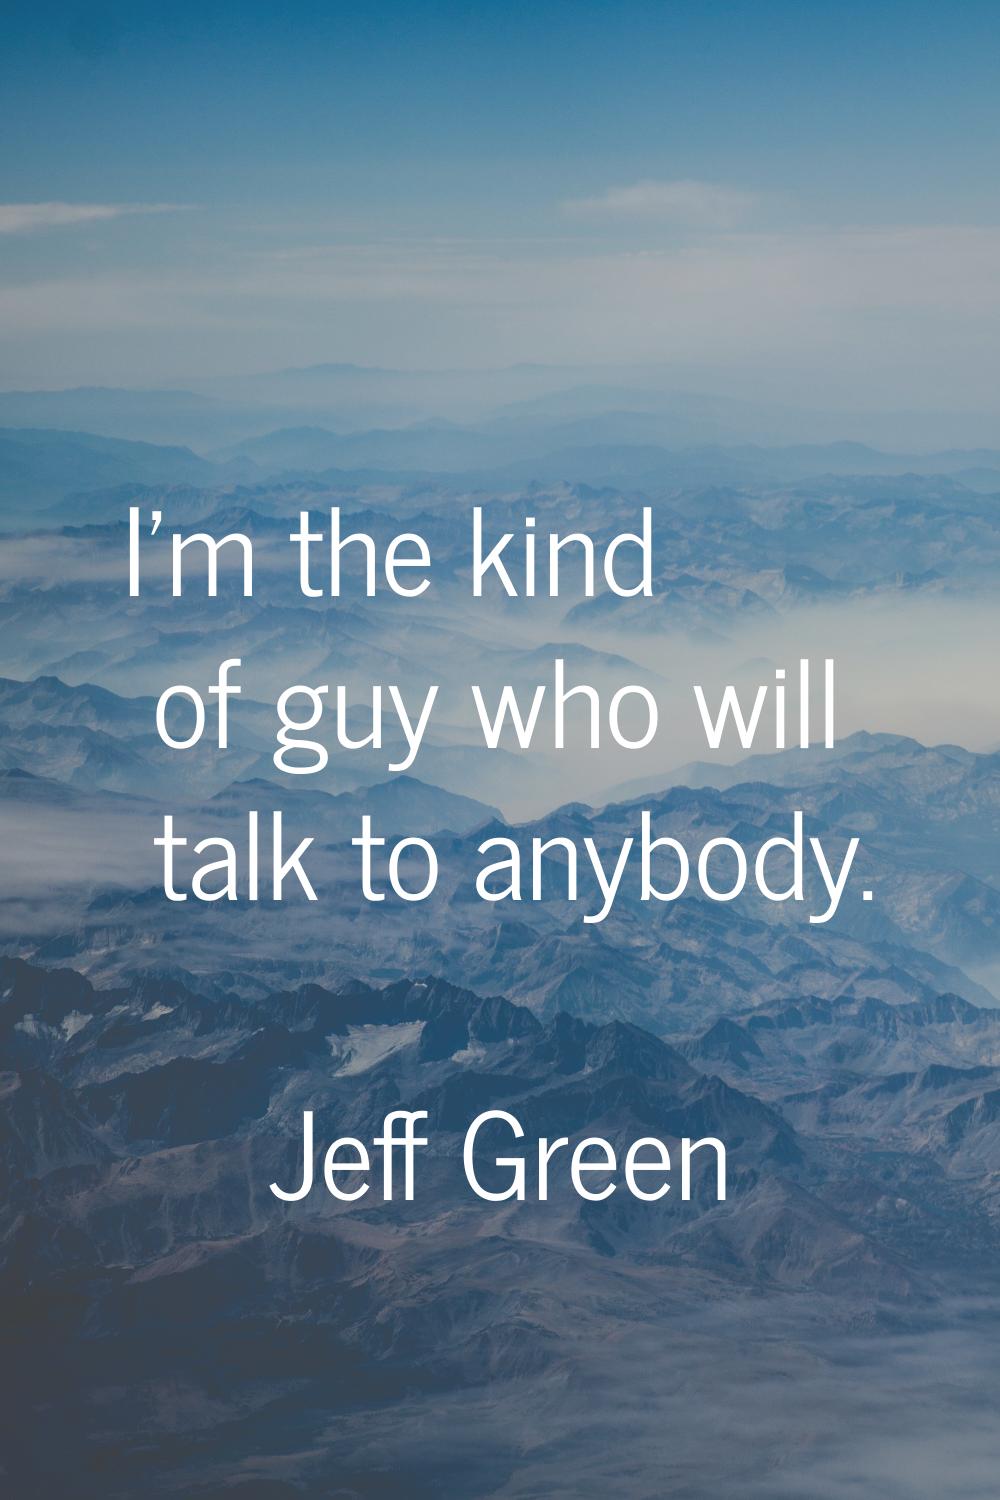 I'm the kind of guy who will talk to anybody.